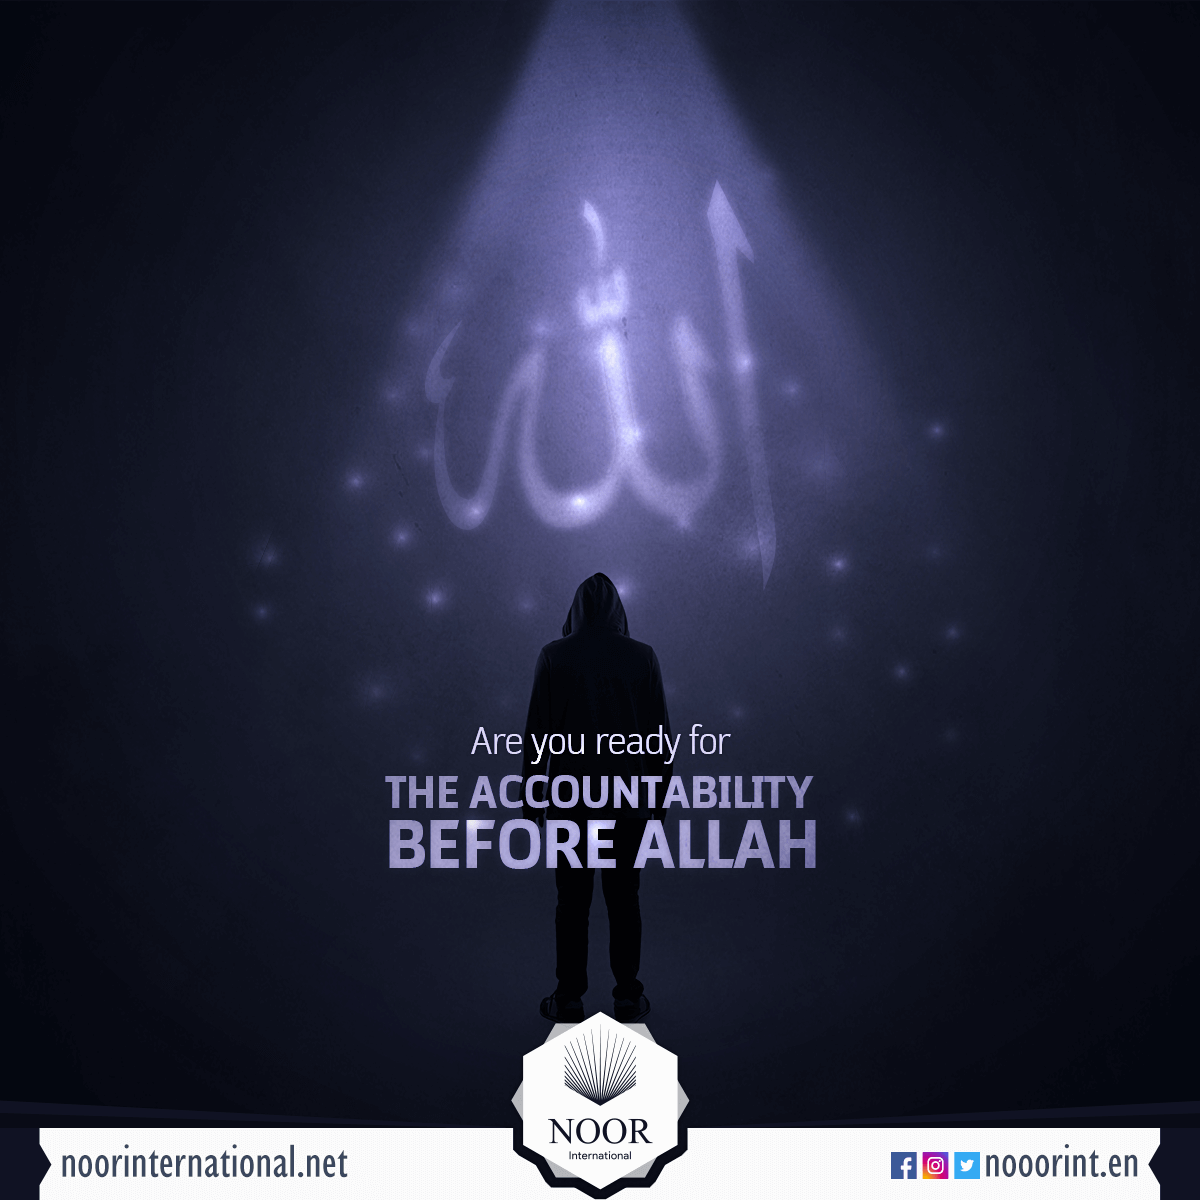 Are you ready for the accountability before Allah?